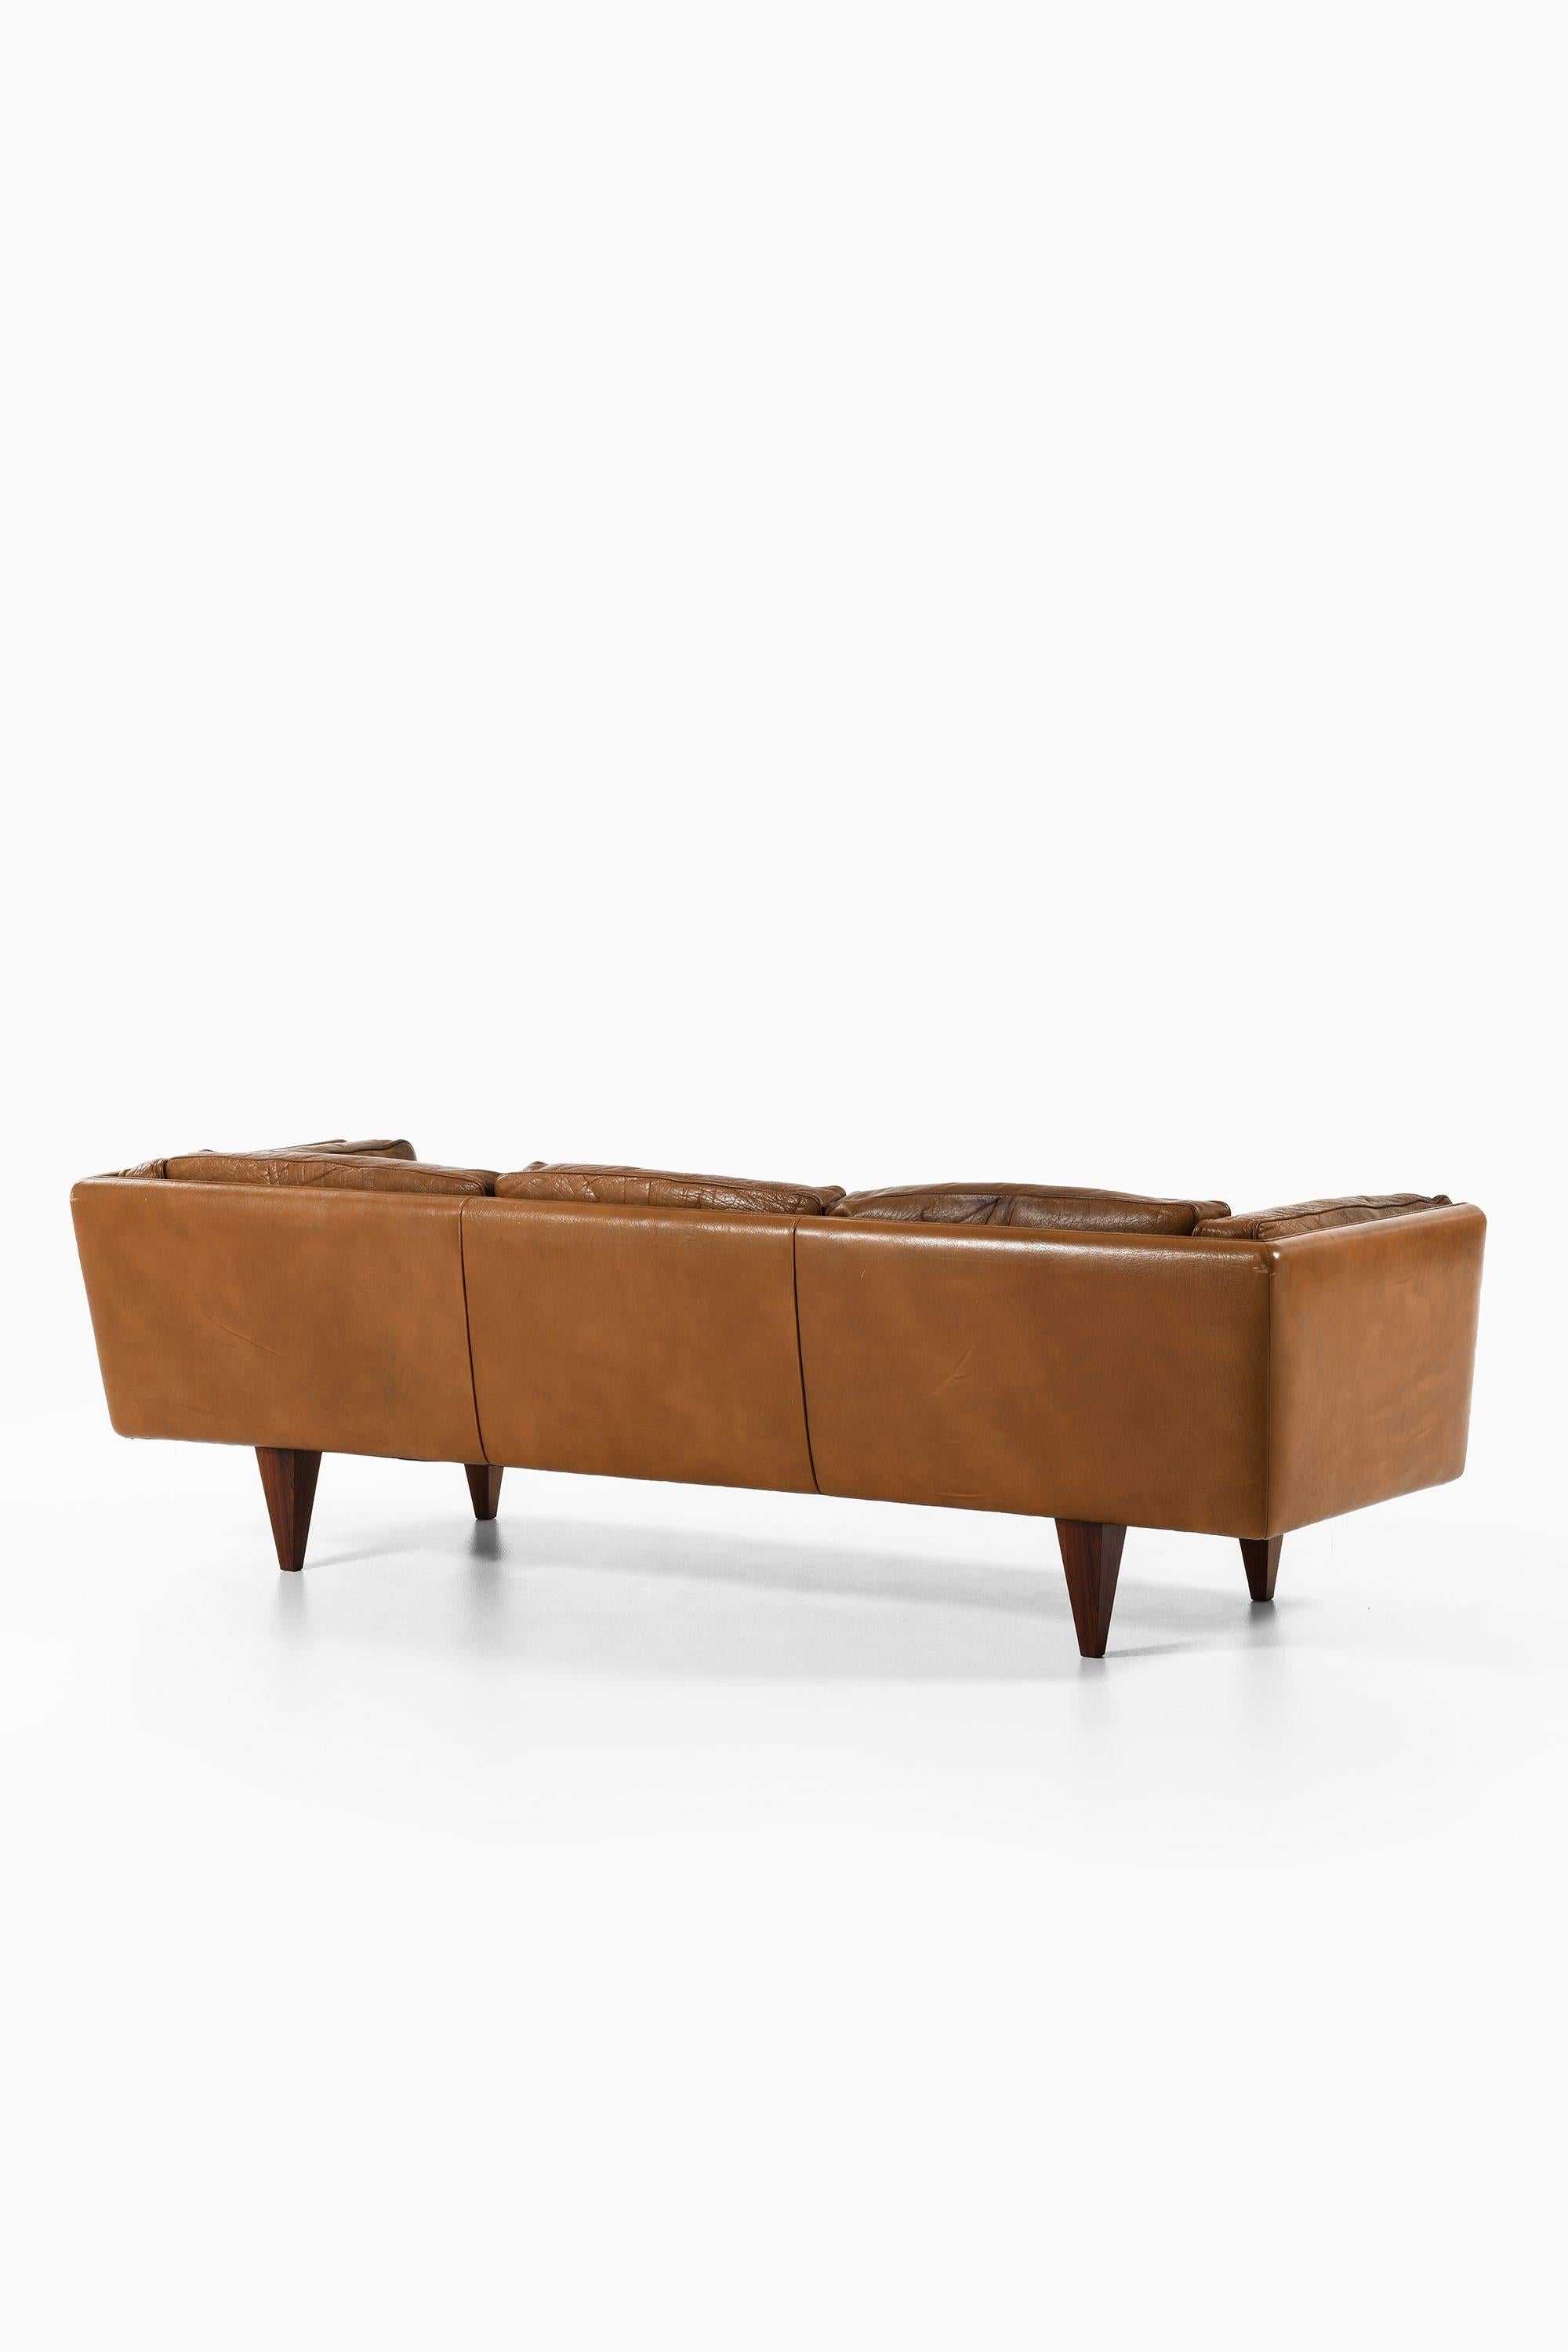 Scandinavian Modern Sofa in Rosewood and Original Brown Leather by Illum Wikkelsø, 1960's For Sale